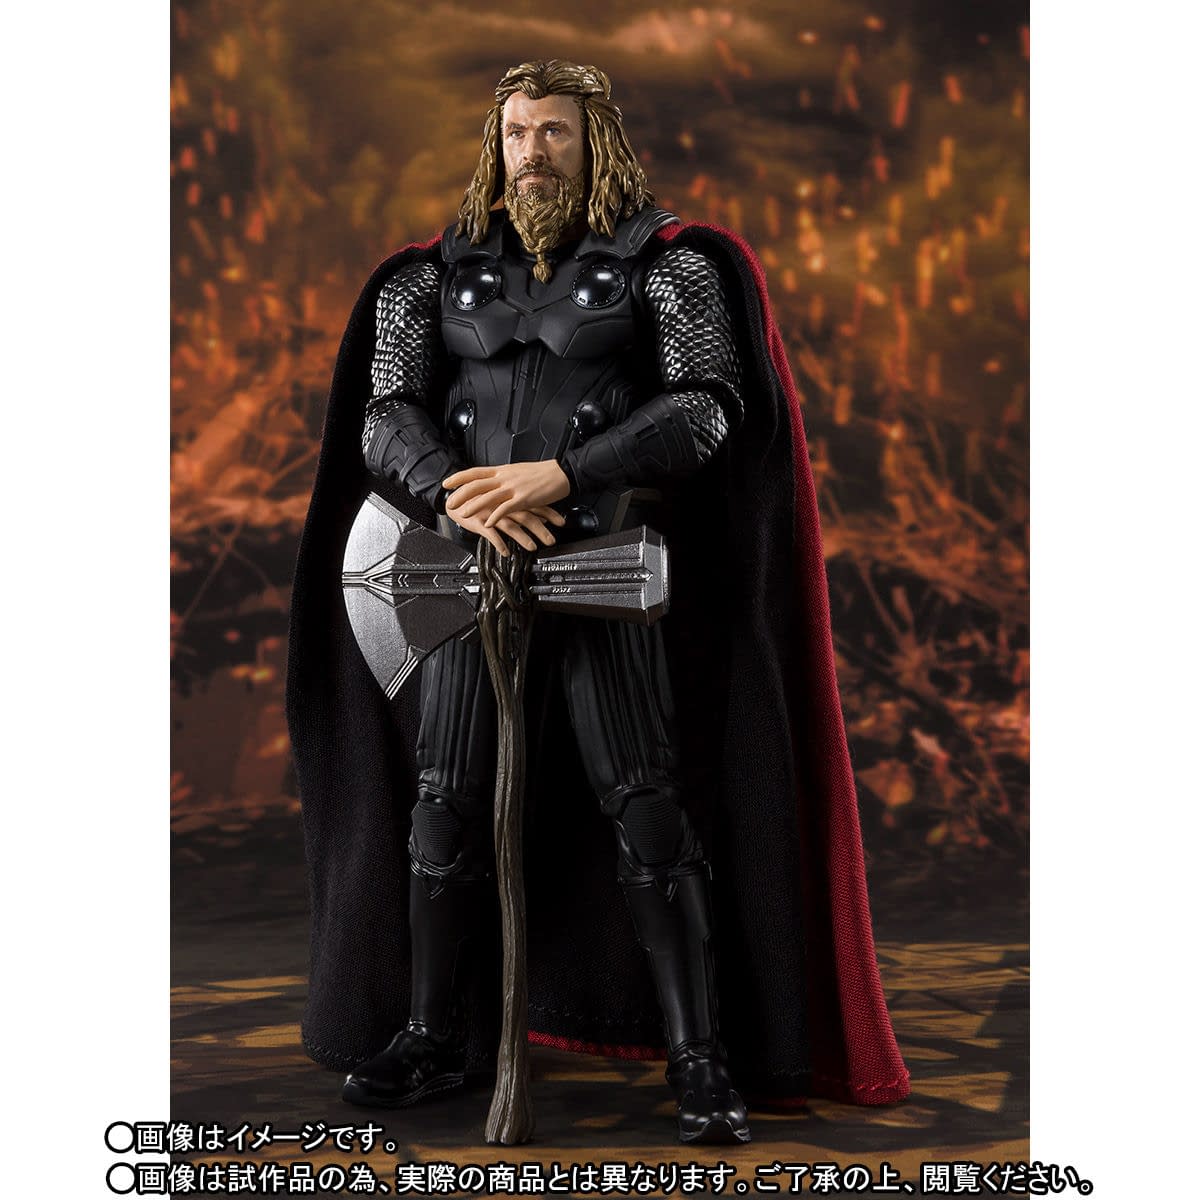 Dude Thor Brings the Thunder and Cheese Whiz with S.H. Figuarts Figure